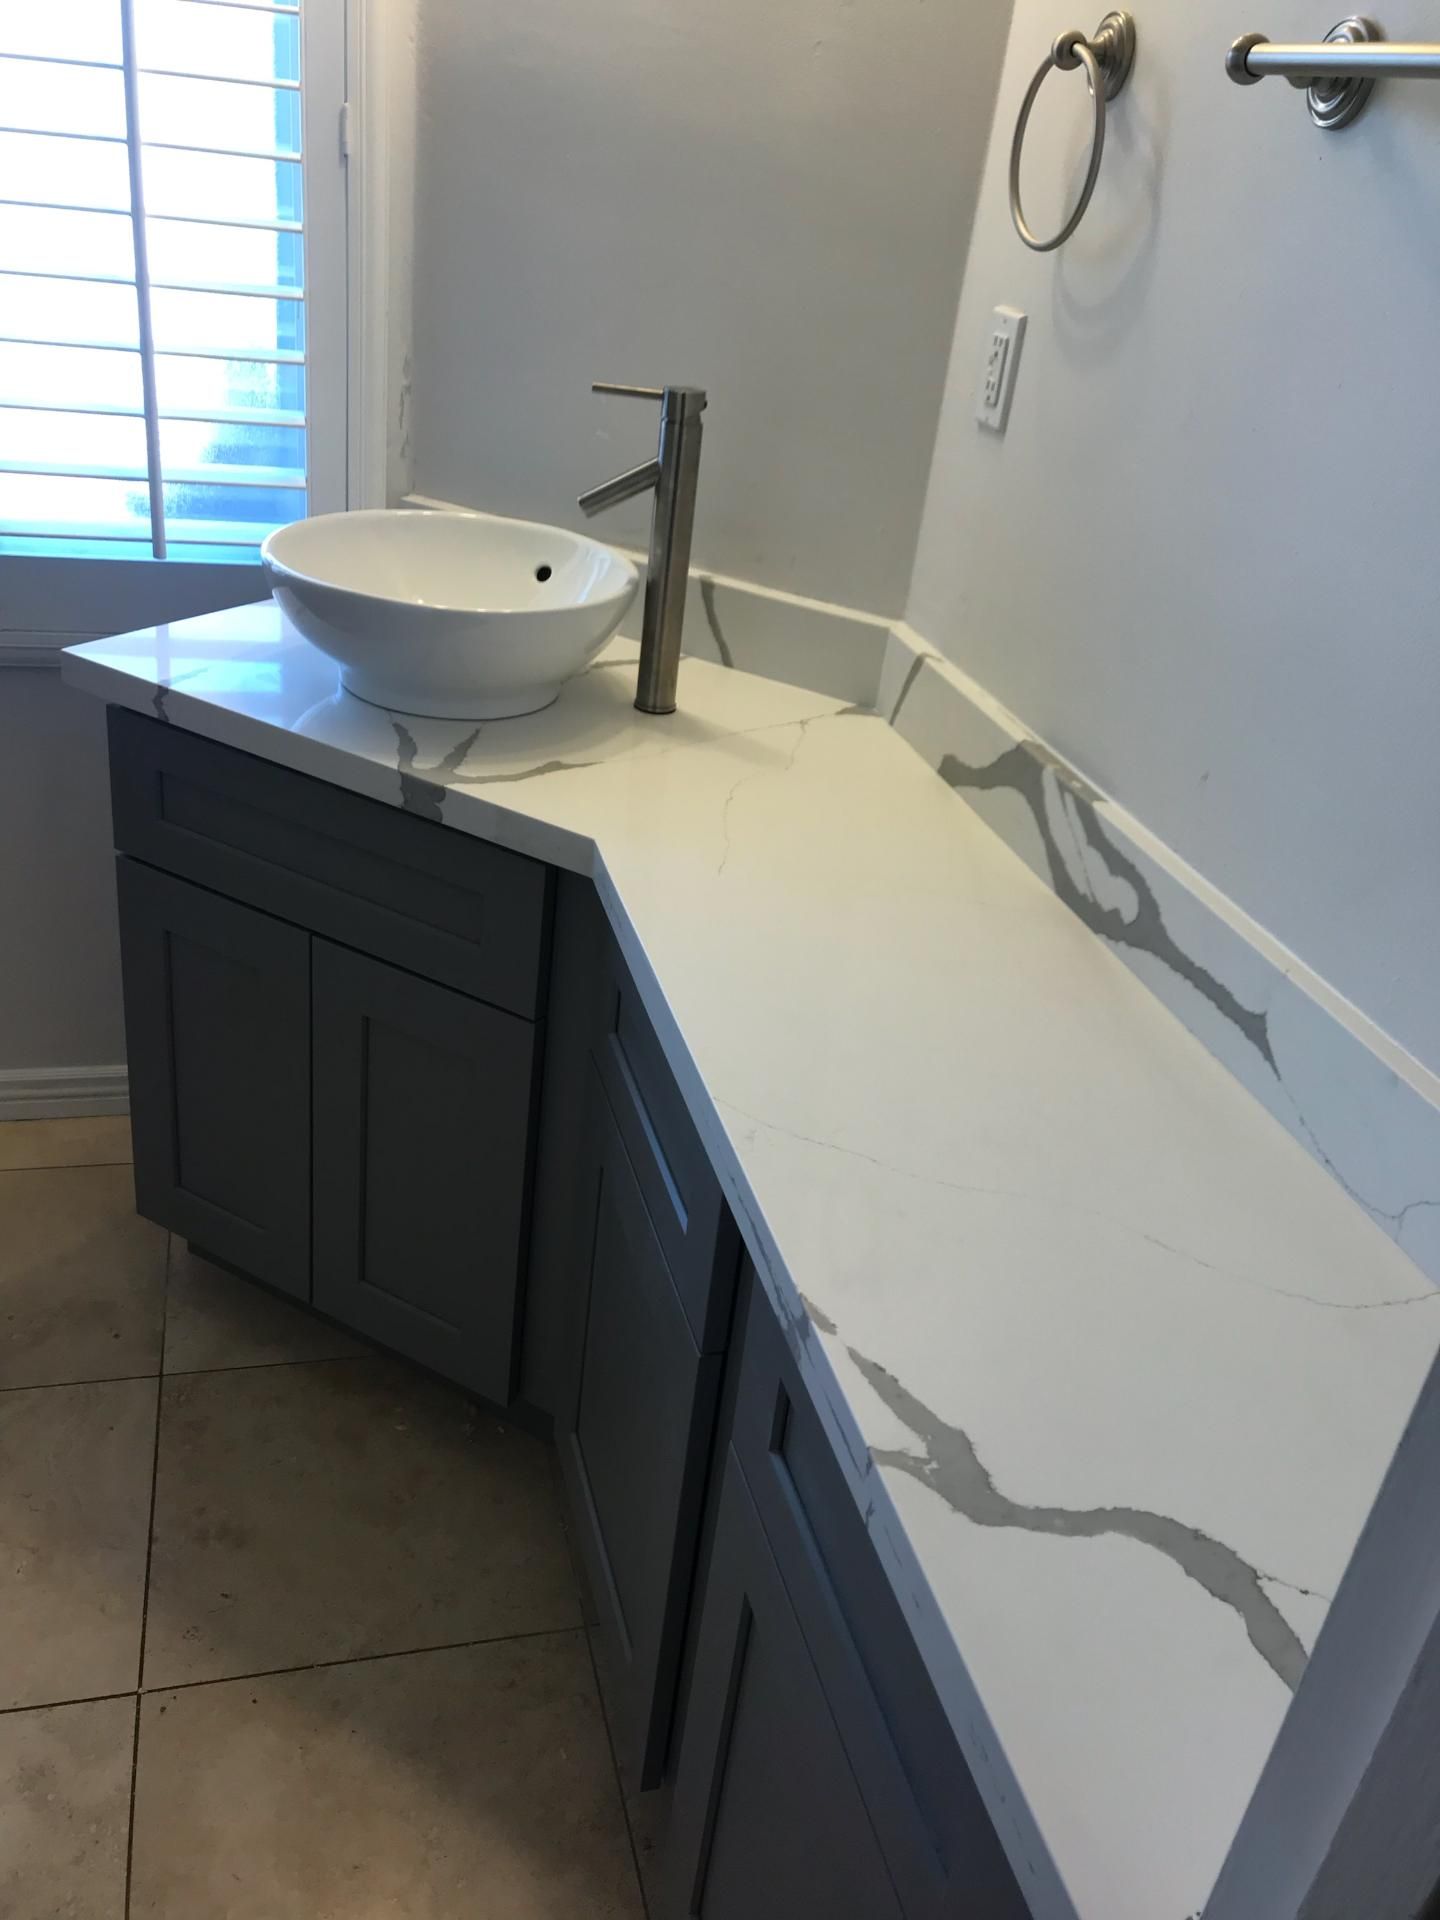 A bathroom with a sink , cabinets , and a window.